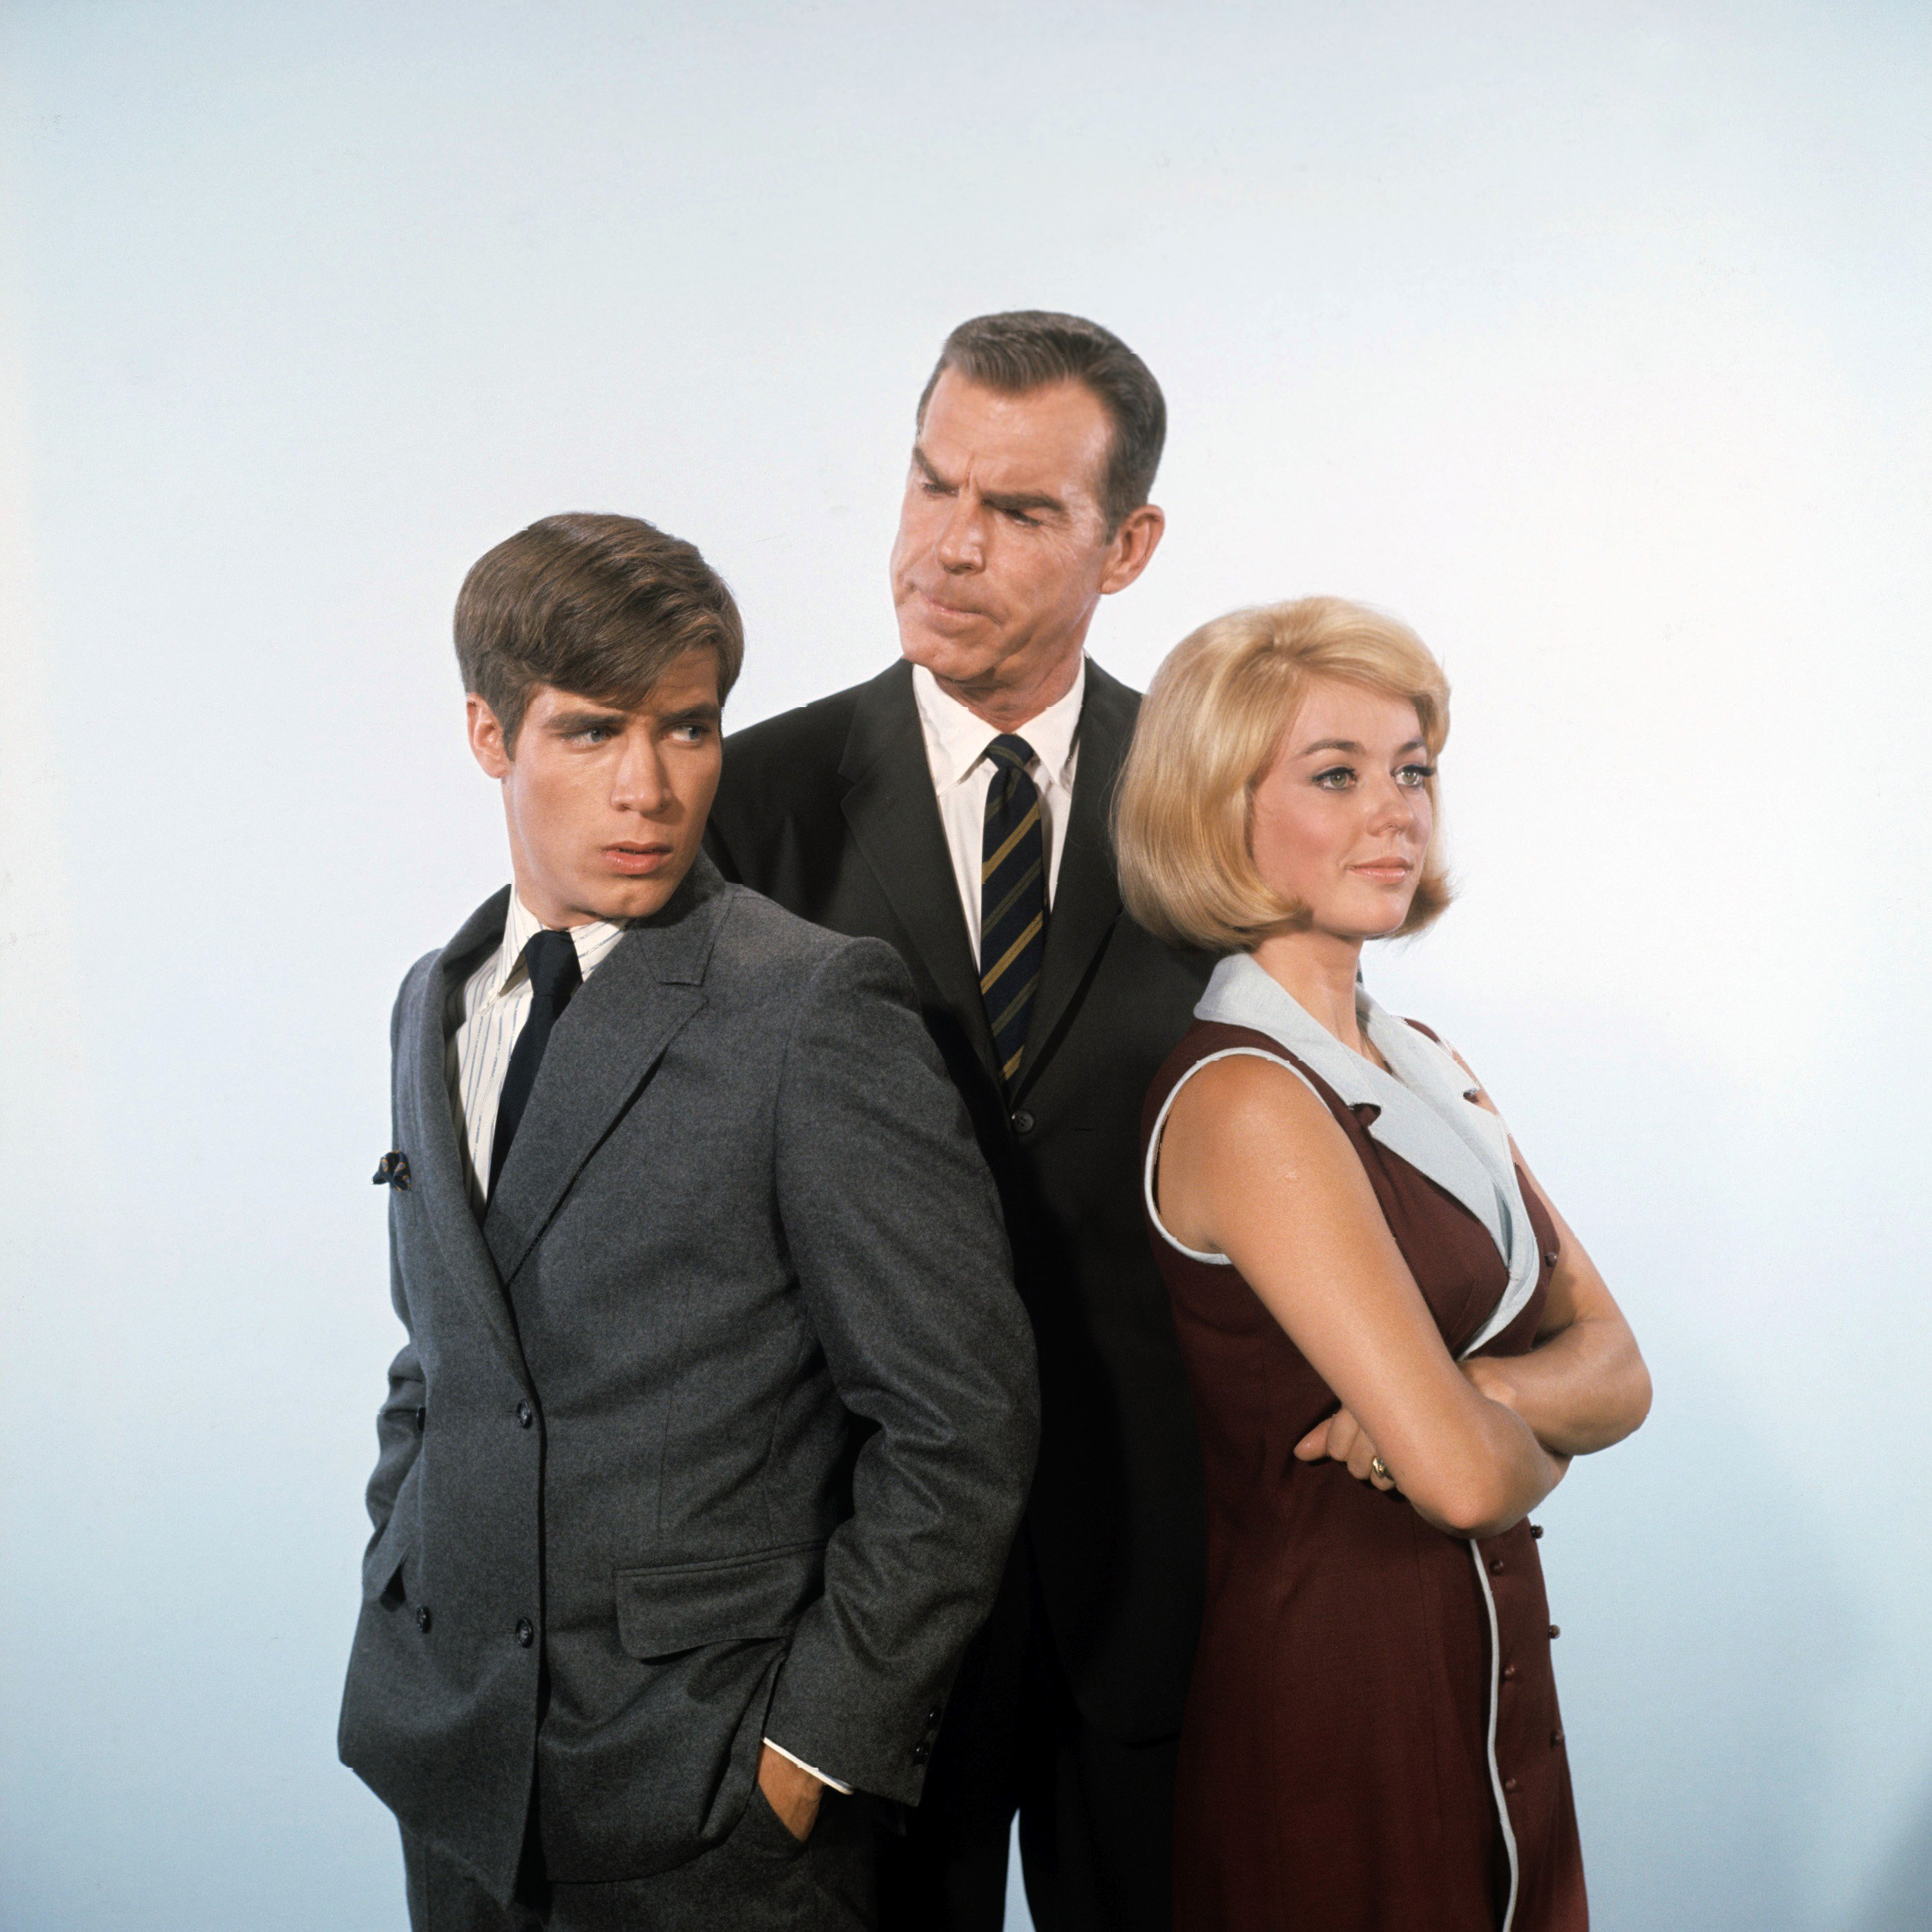 Don Grady, Fred MacMurray, Tina Cole pose for "My Three Sons" photocall on September 4, 1968. | Photo: Getty Images